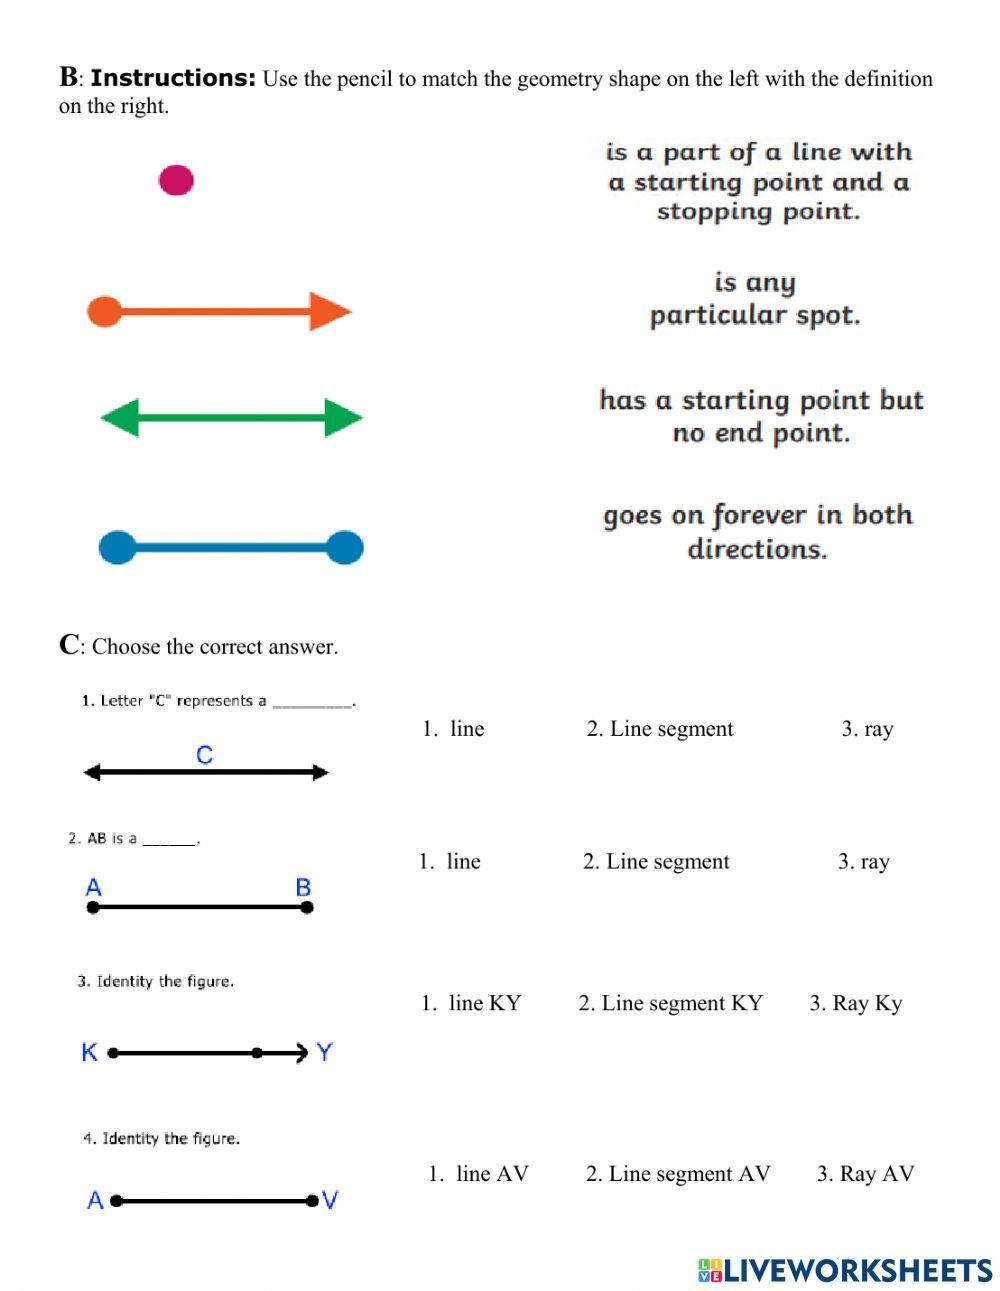 Line, line segment, ray, and point